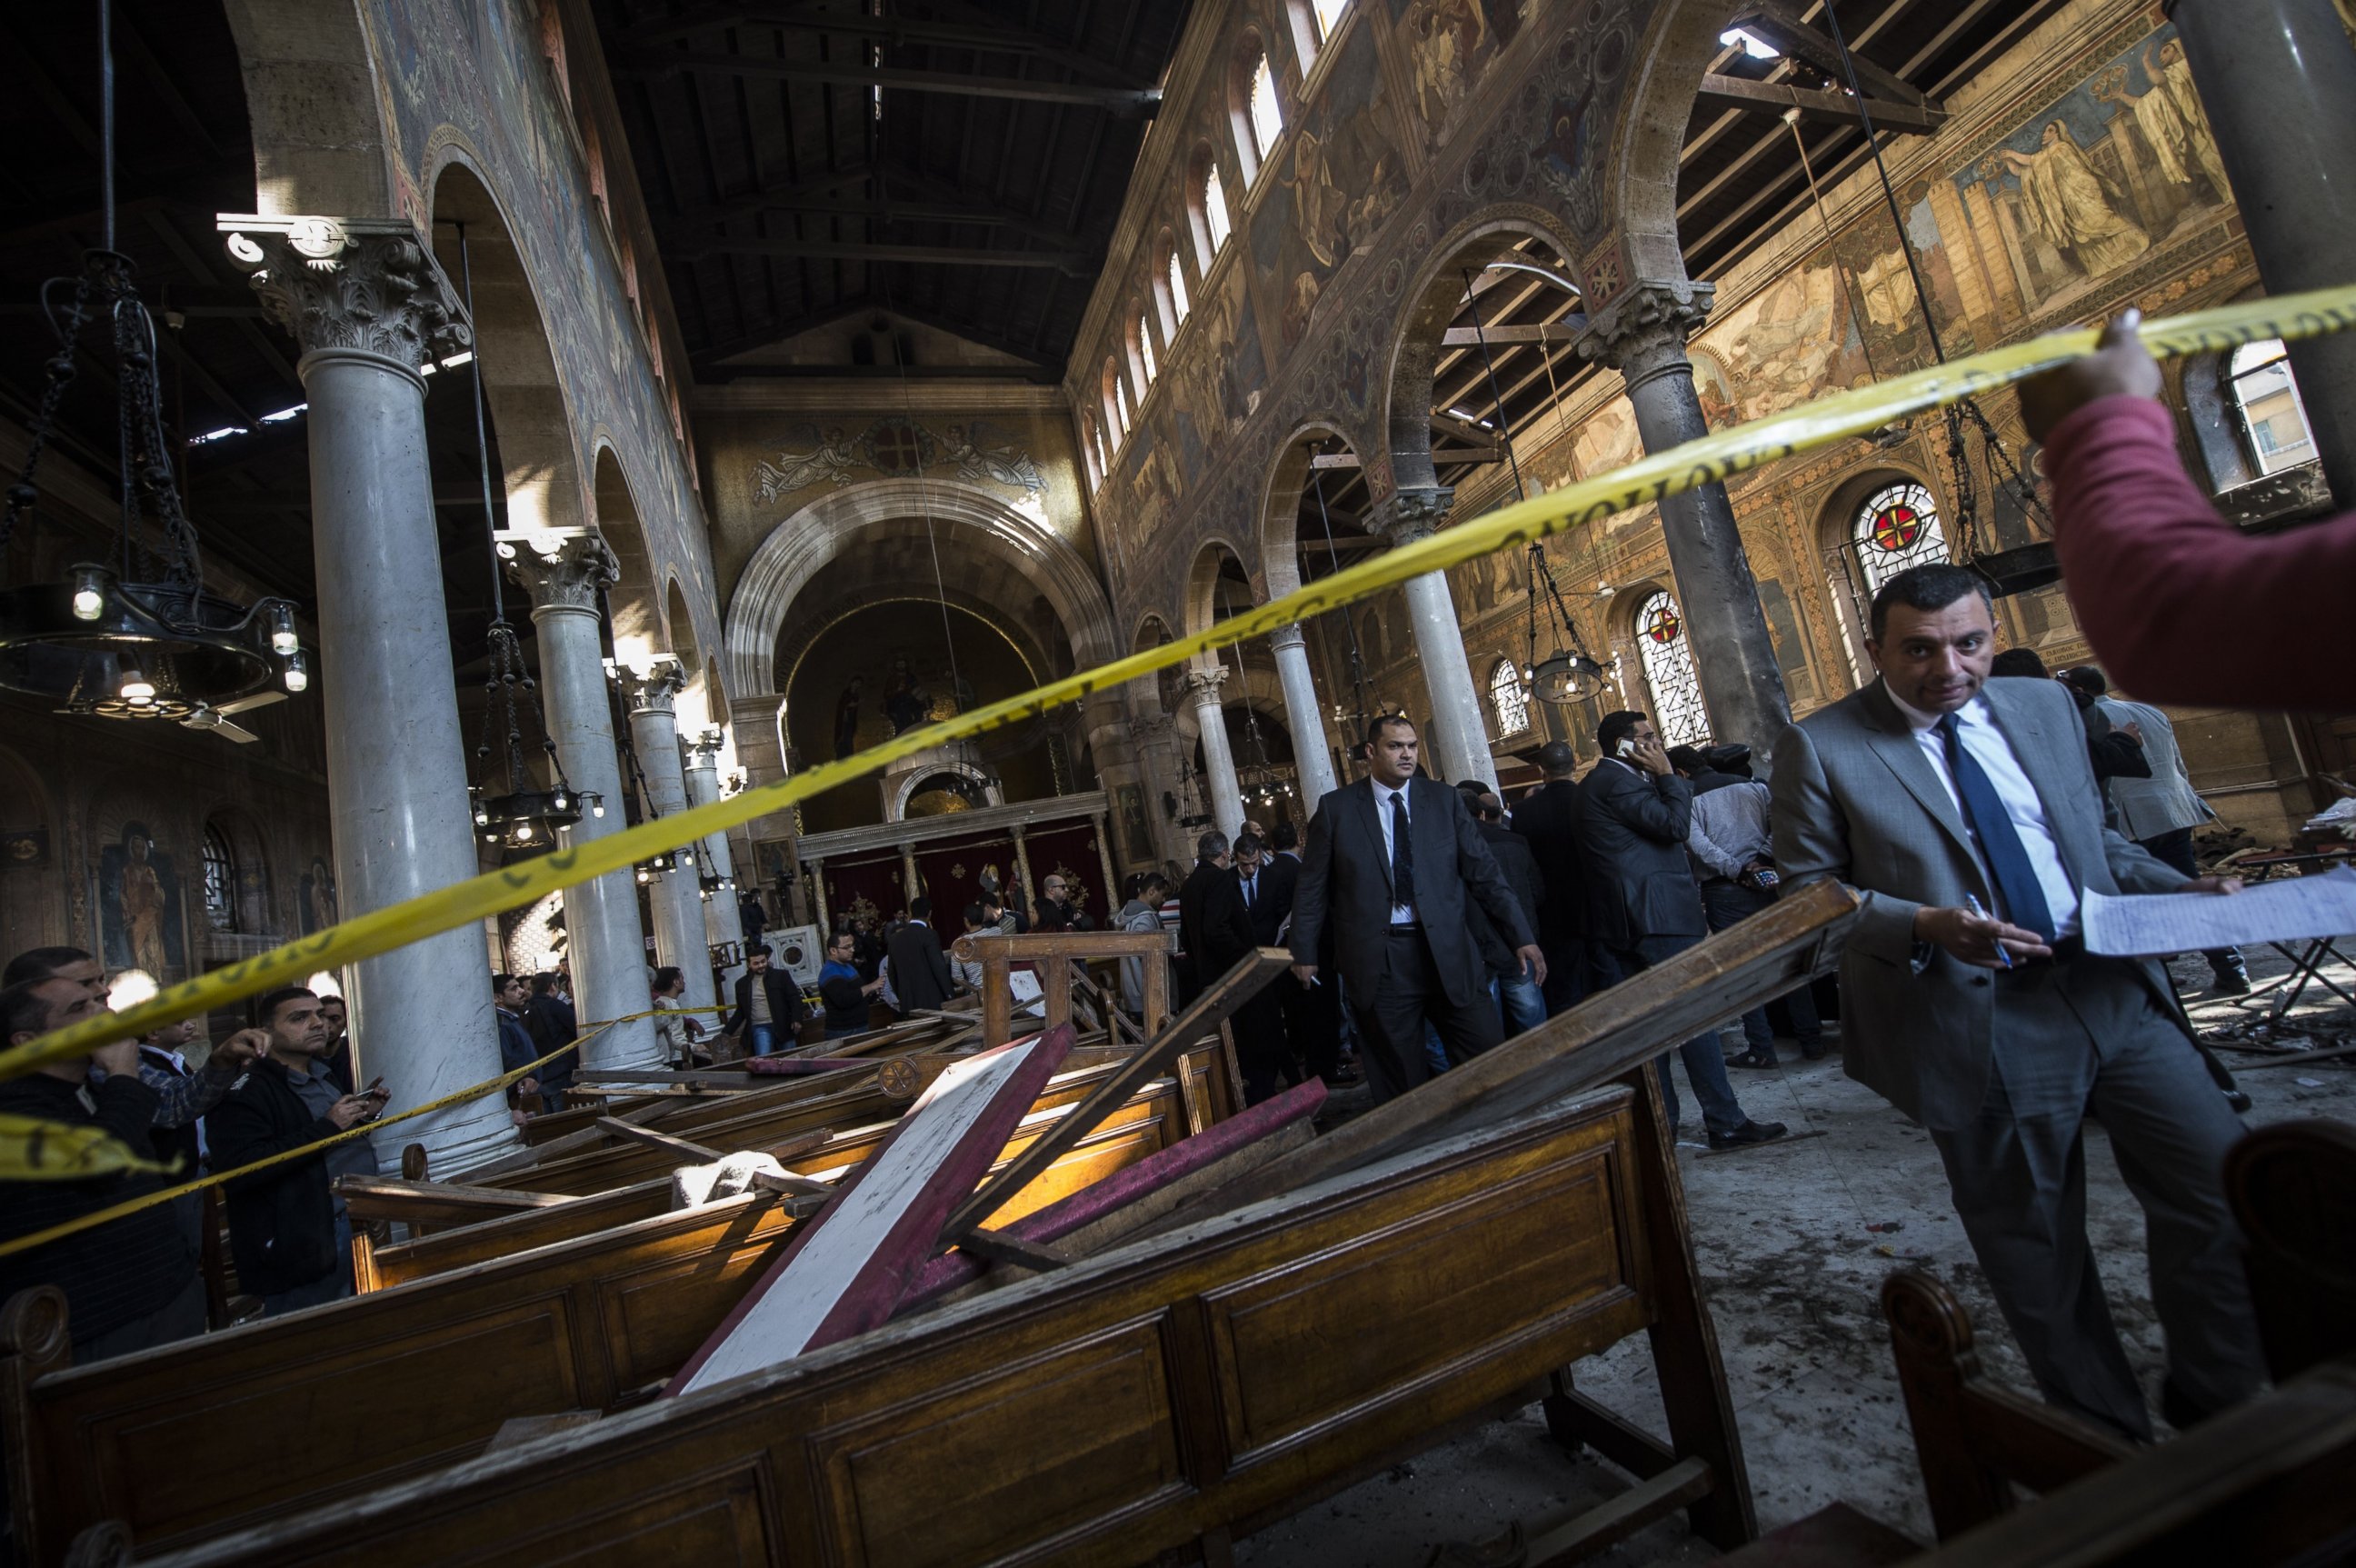 PHOTO: Egyptian security forces inspect the scene of a bomb explosion at the Saint Peter and Saint Paul Coptic Orthodox Church, Dec. 11, 2016, in Cairo's Abbasiya neighborhood.